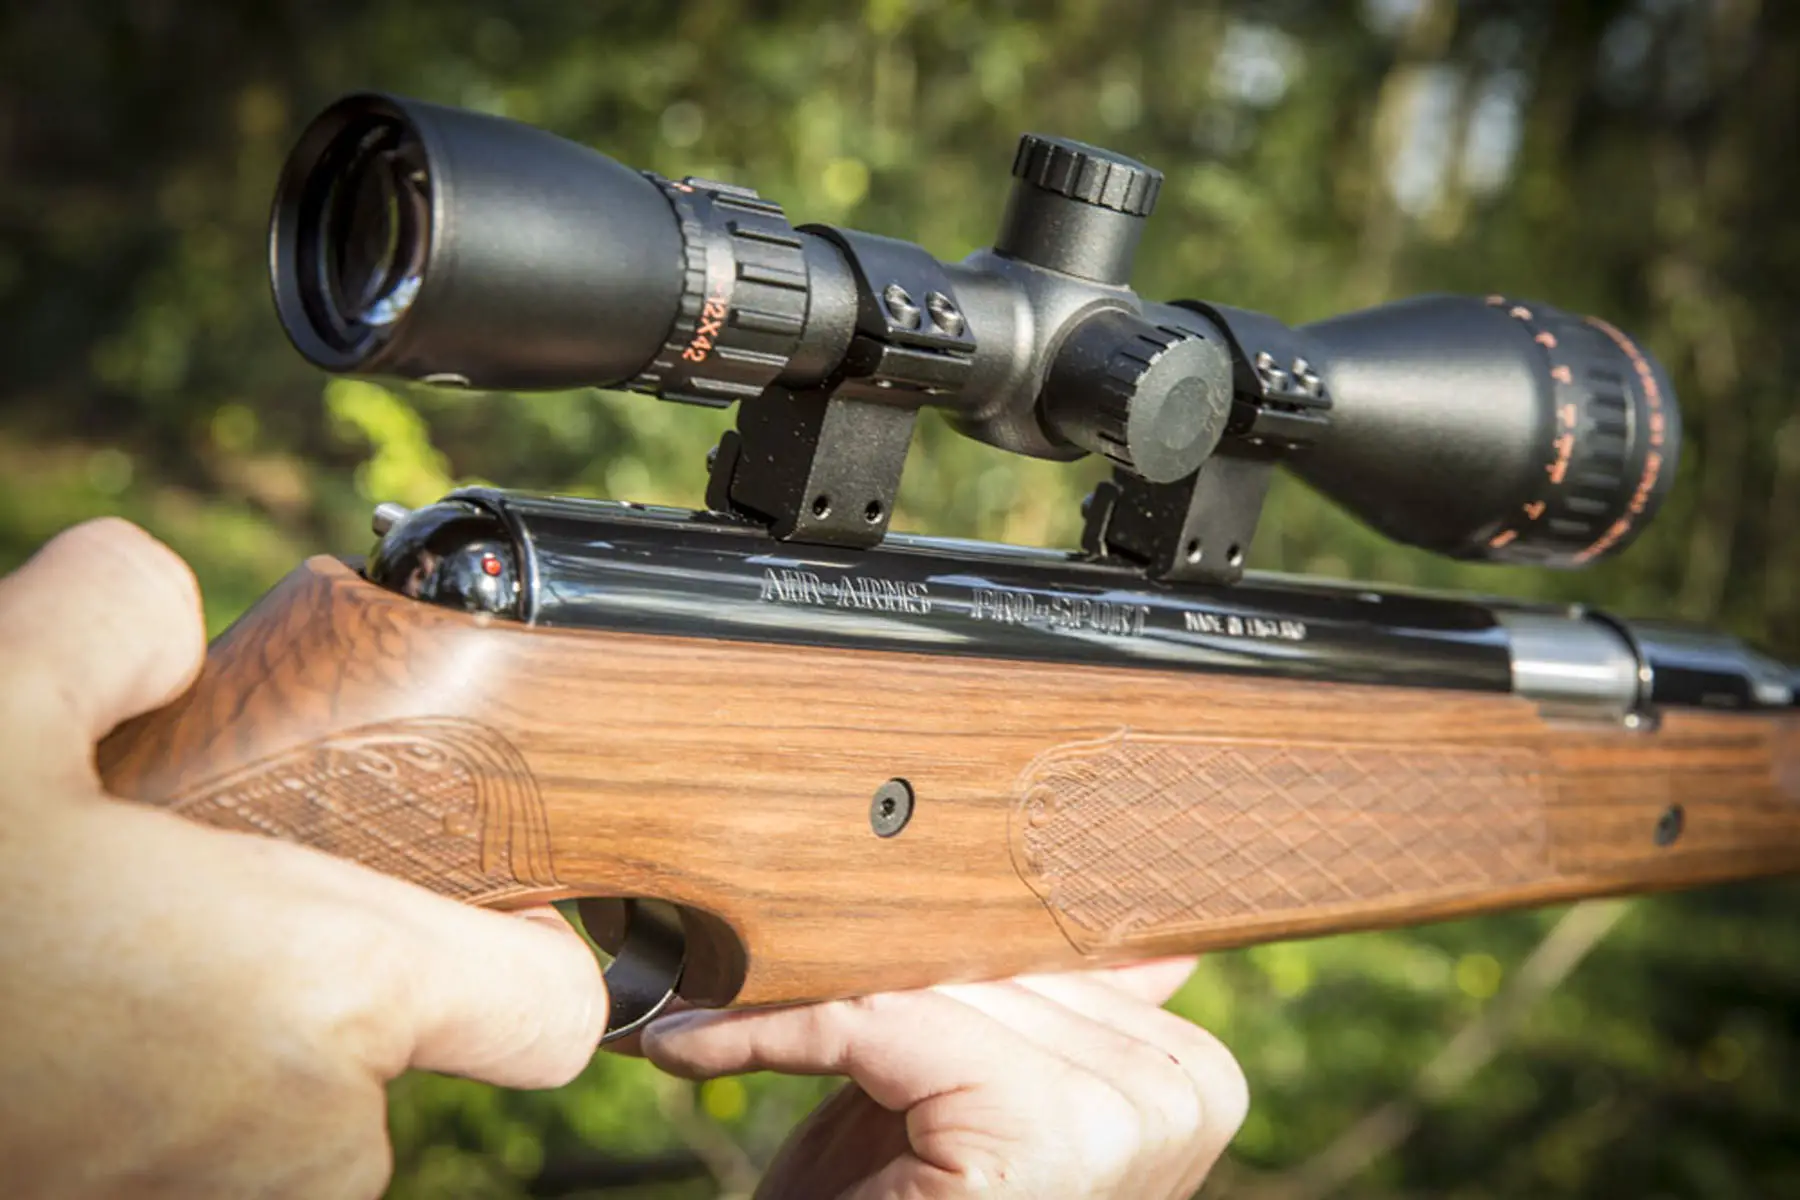 pro2 Best Spring Air Rifles - Top 7 Springers for the money (Reviews & Buying Guides 2022)